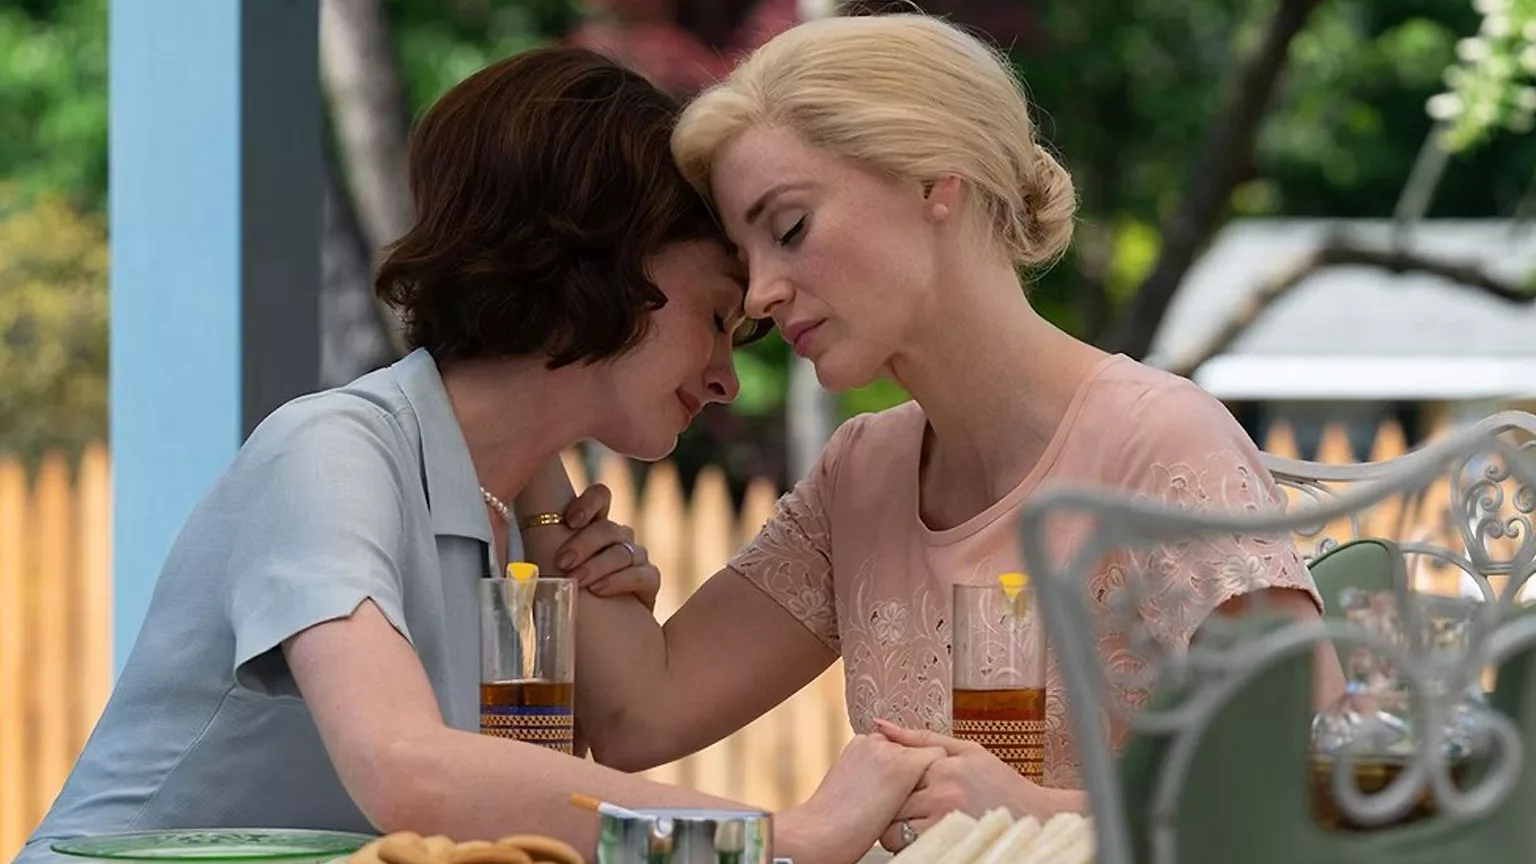 Mothers Instinct Review: Hathaway And Chastain Melodrama